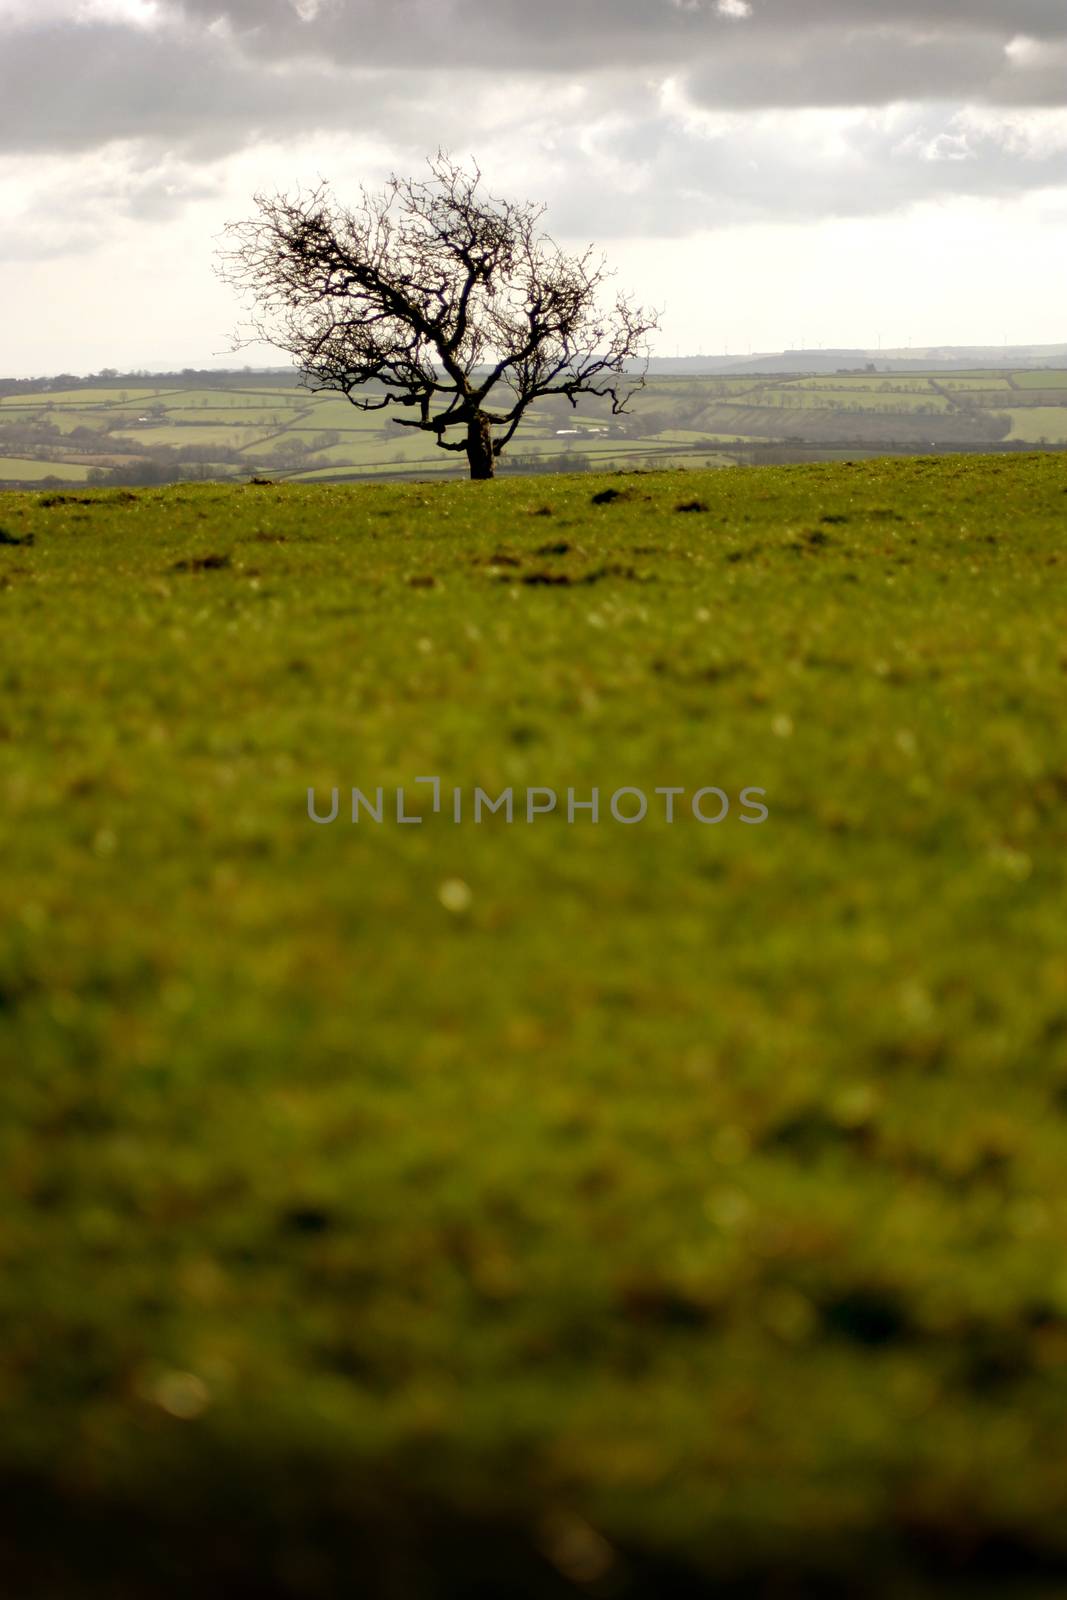 A lonely tree in the middle of a Welsh hillside field.